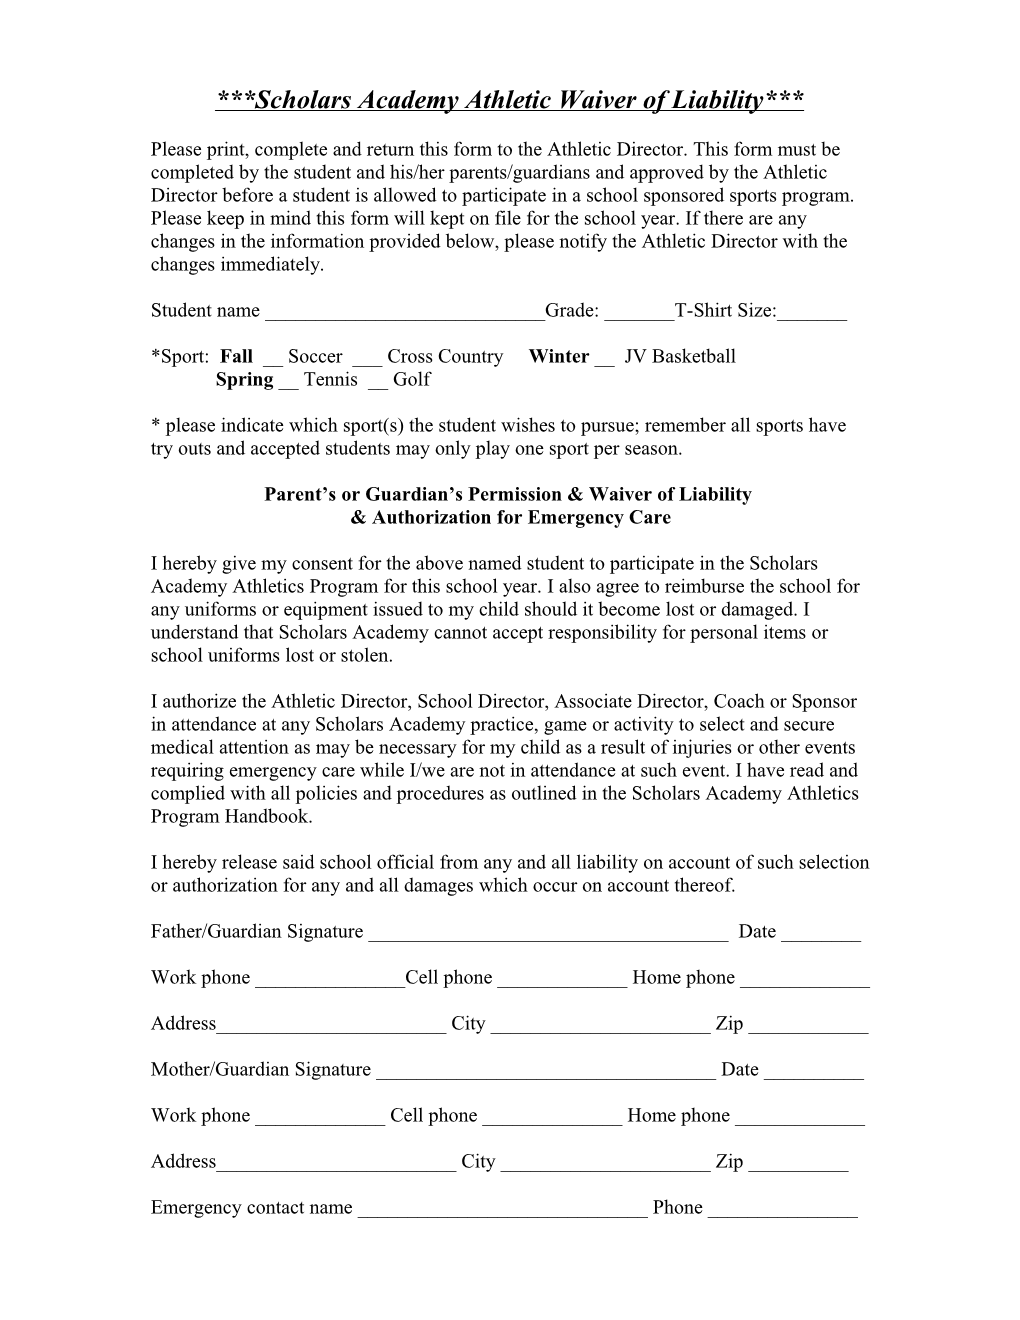 Scholars Academy Athletic Waiver of Liability